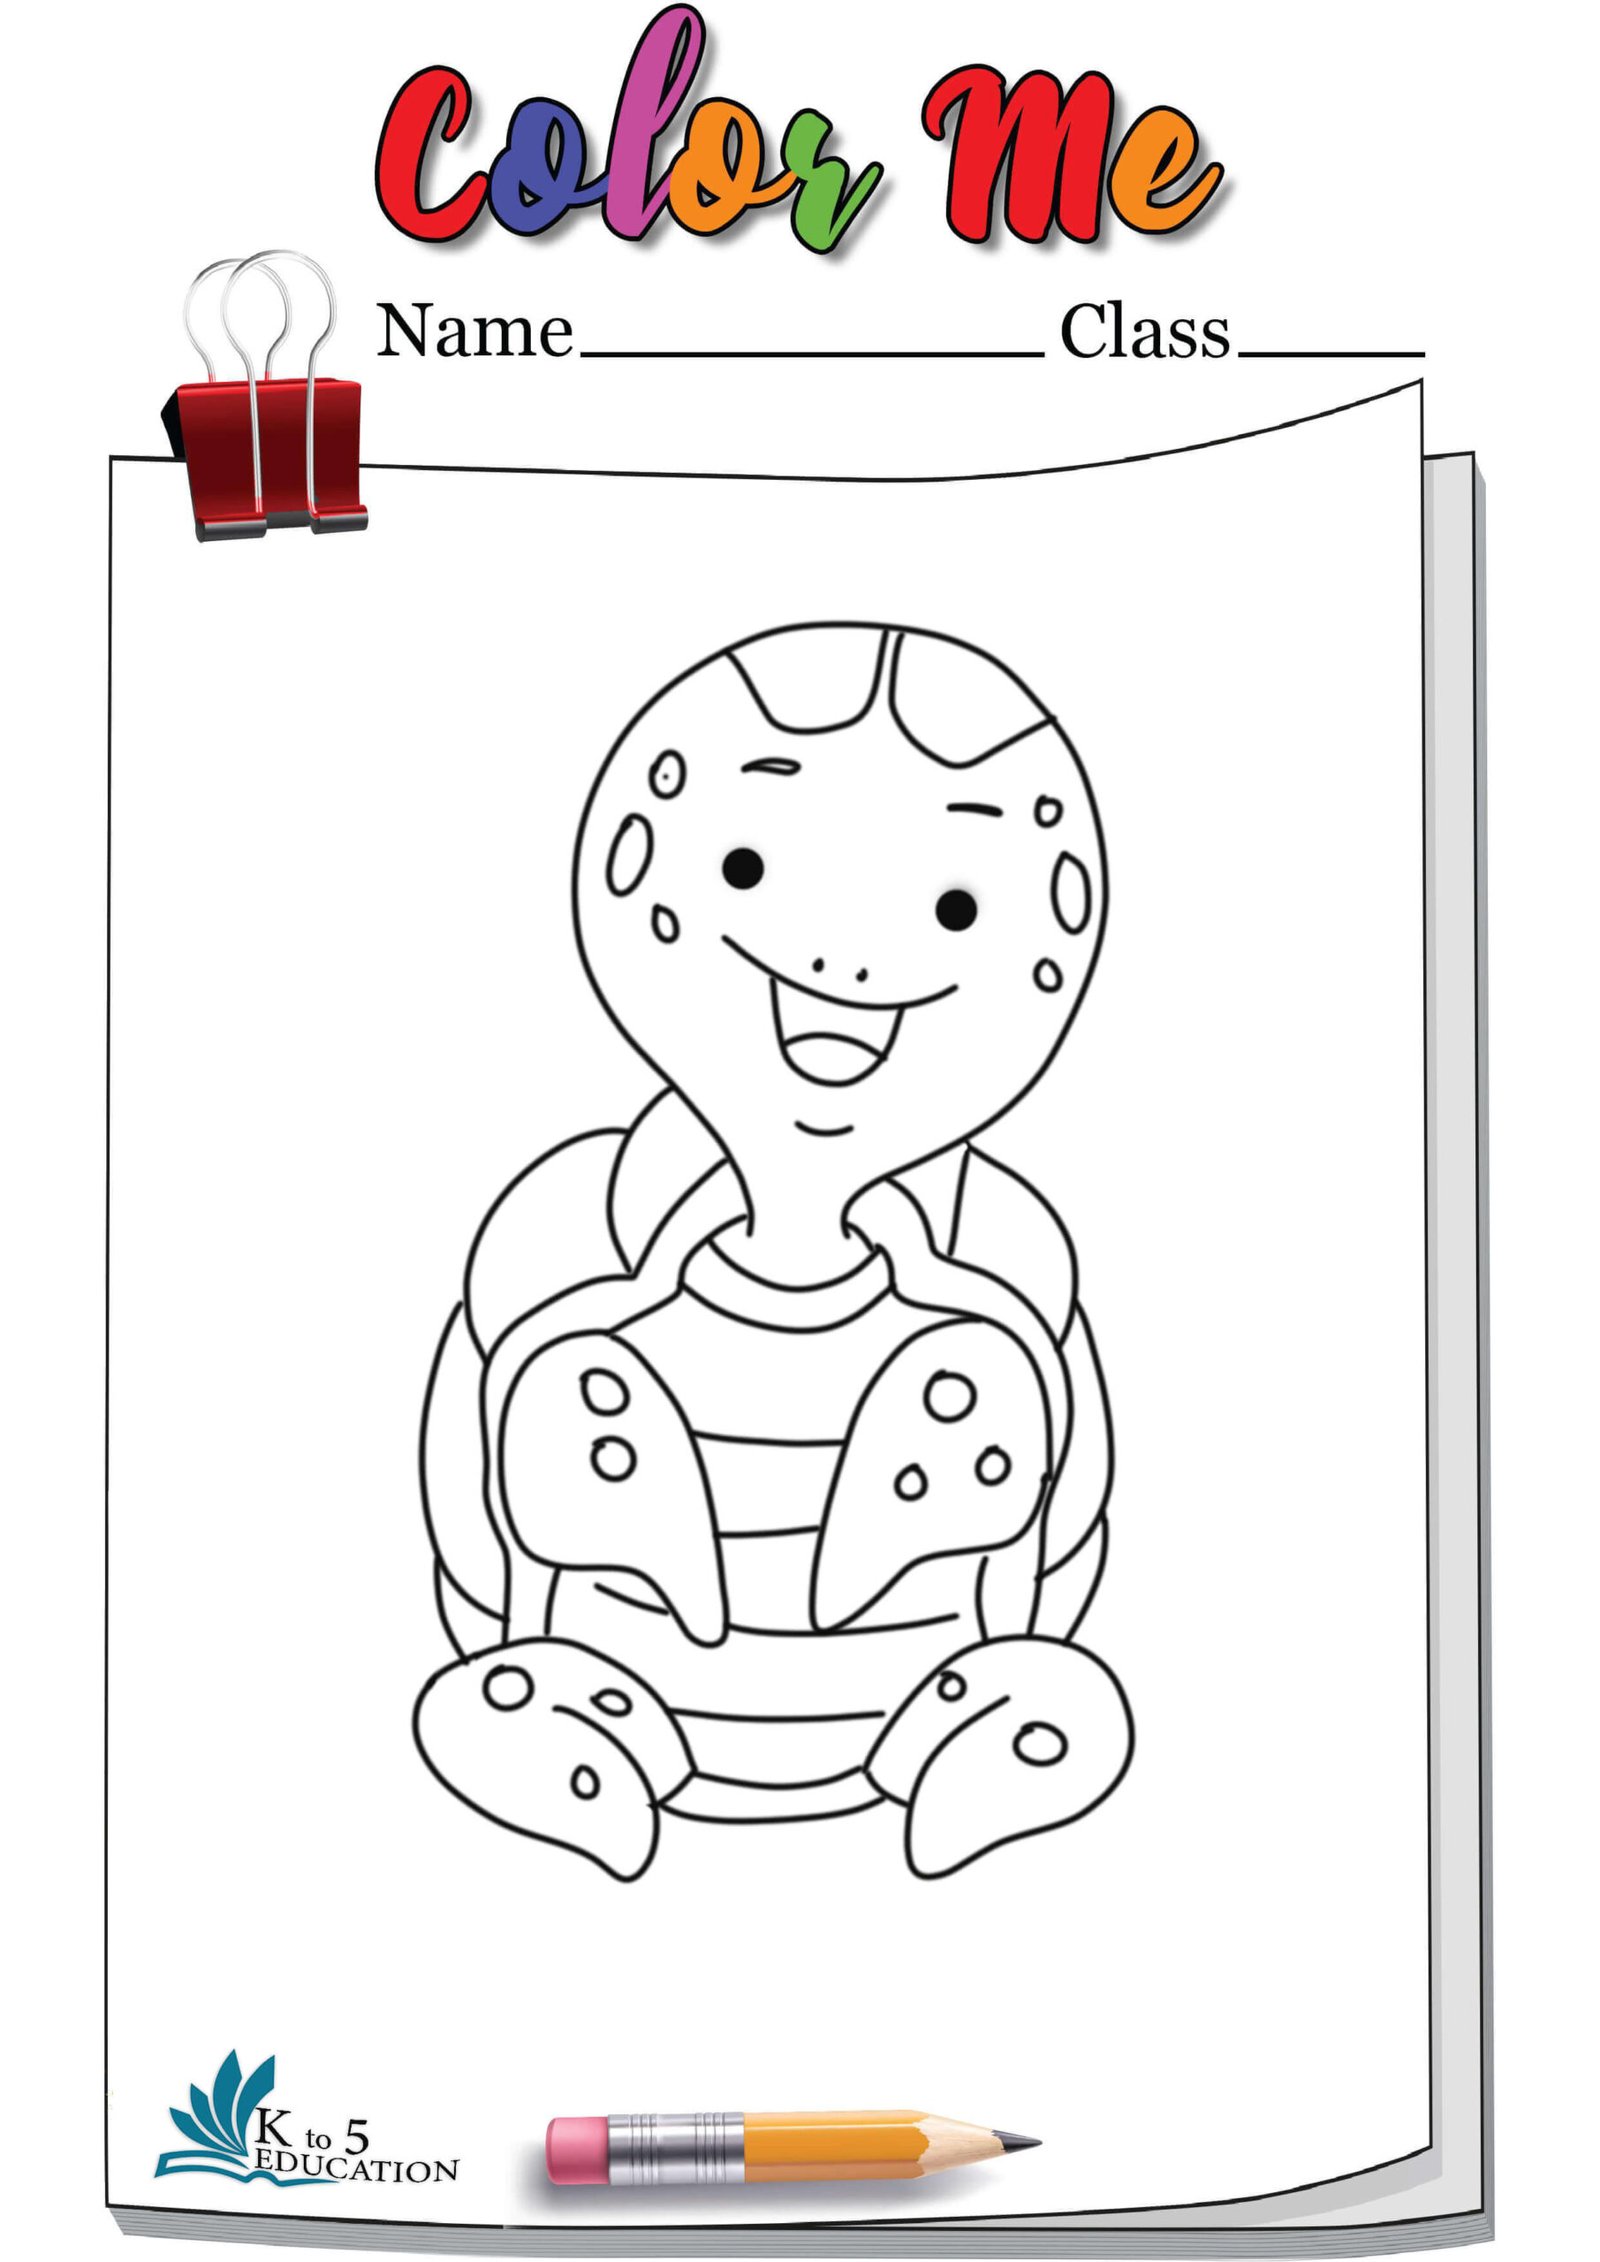 Cute Turtle Coloring Pages